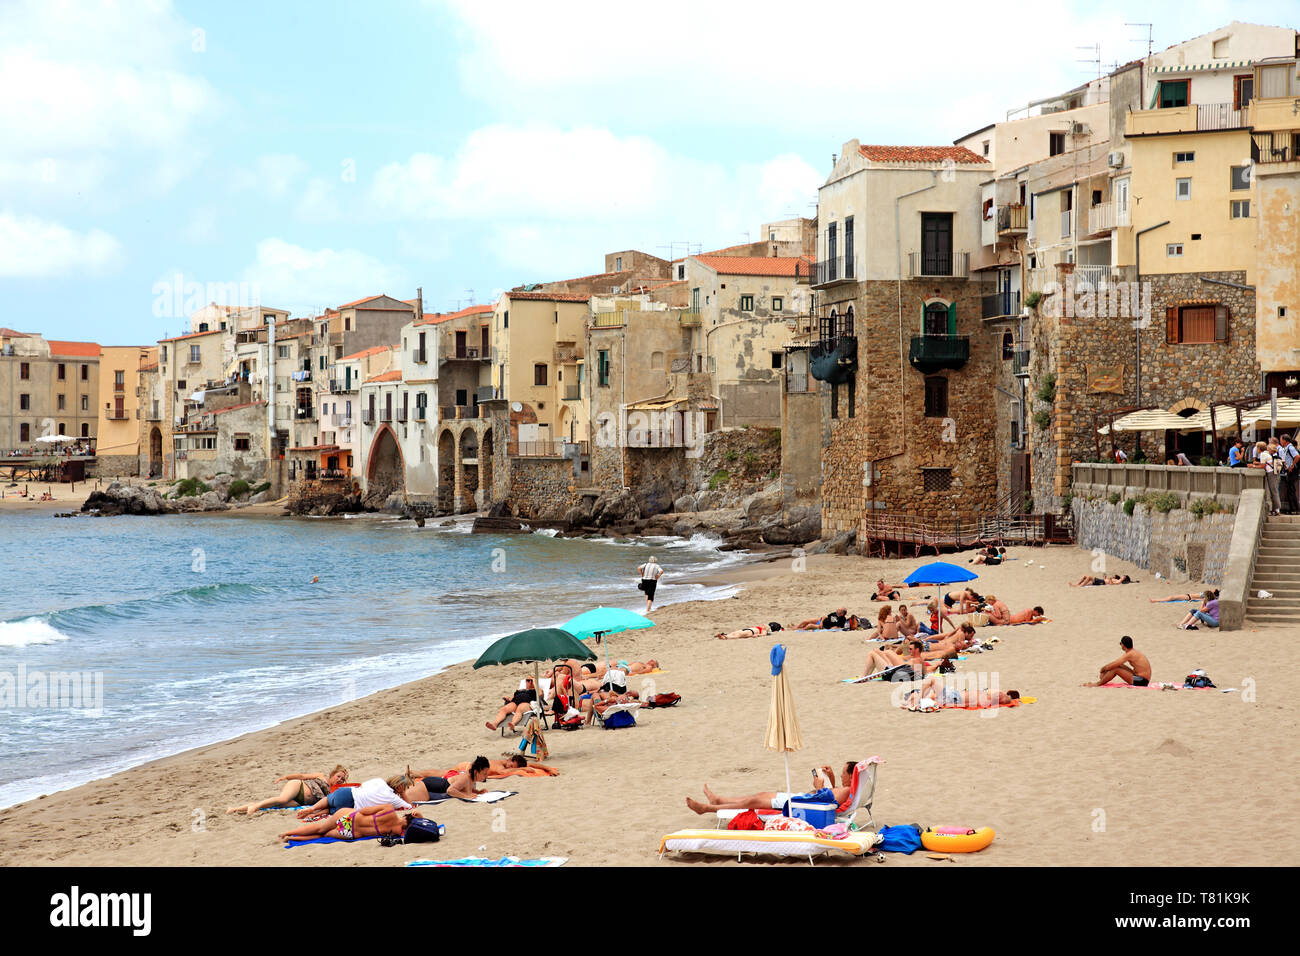 People enjoying the beach in Cefalu in Sicily Italy Stock Photo